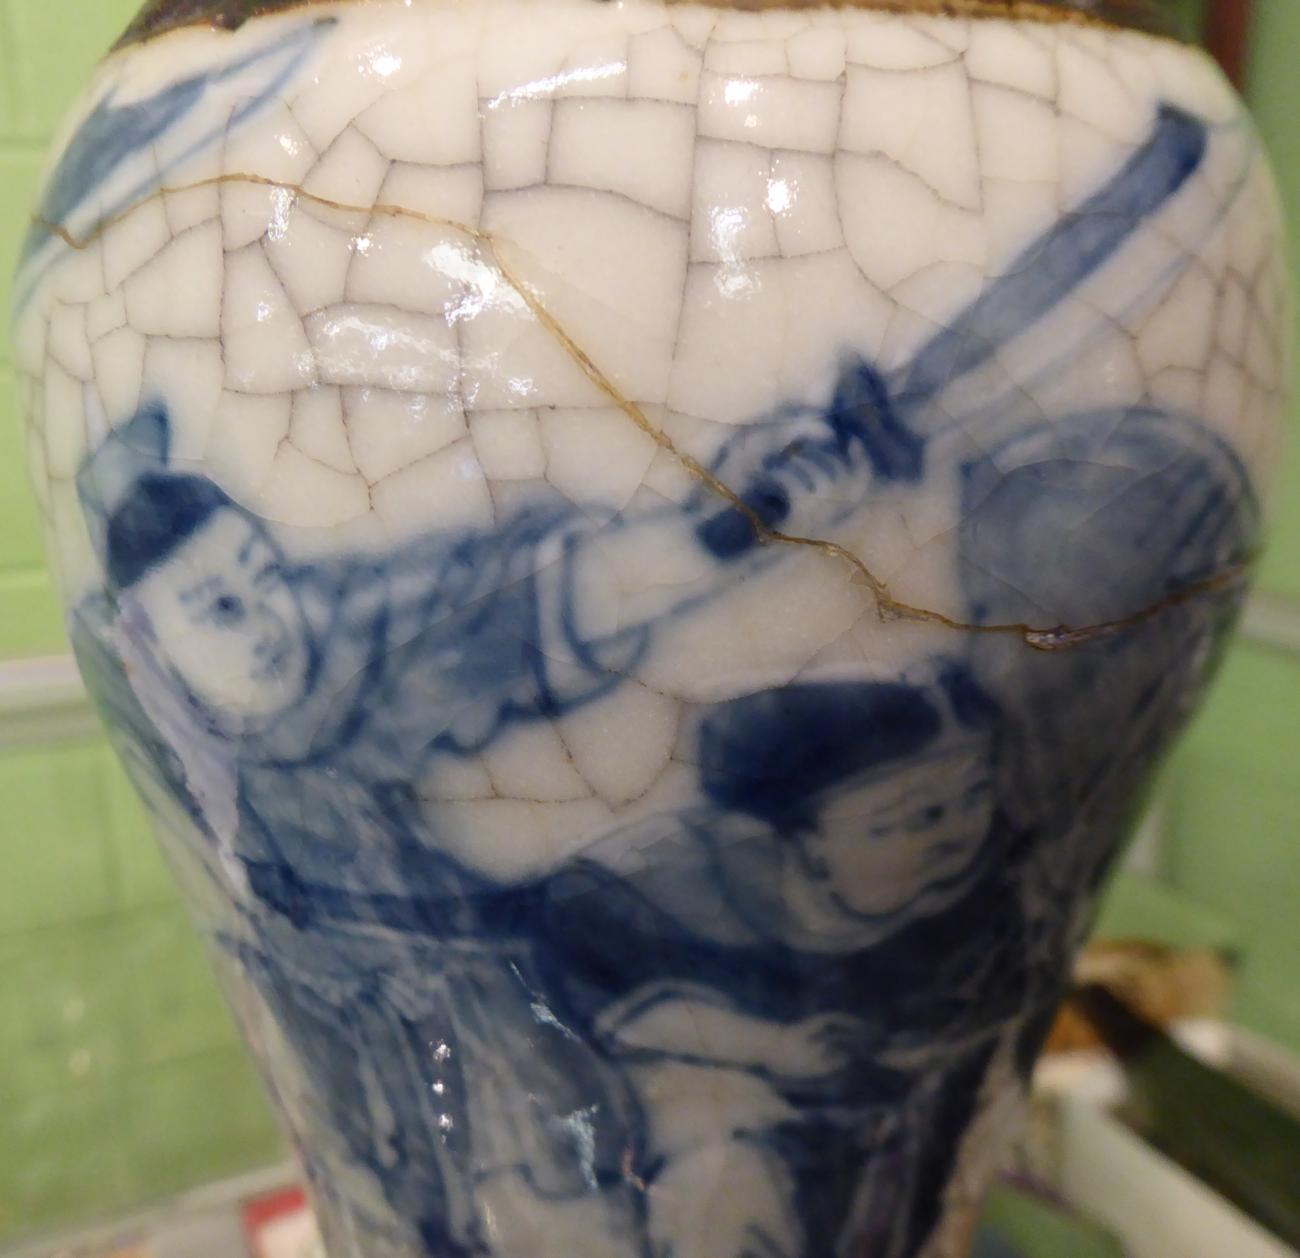 Six Chinese crackle glazed vases 20th century. Each with firing flaws. - Image 3 of 9